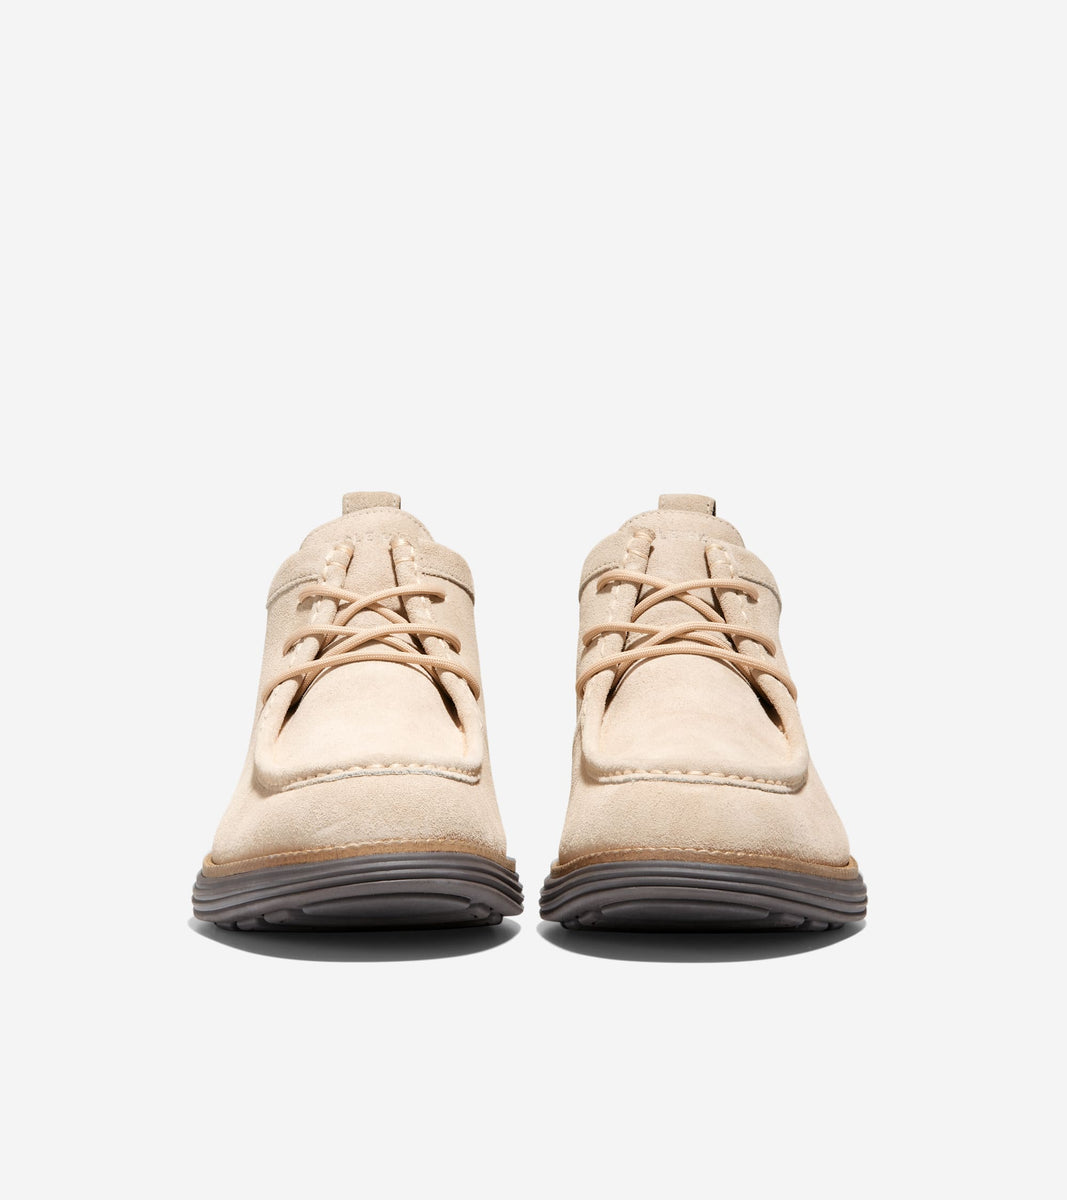 C38732:TAN SUEDE/CH NATURAL/JAVA WR